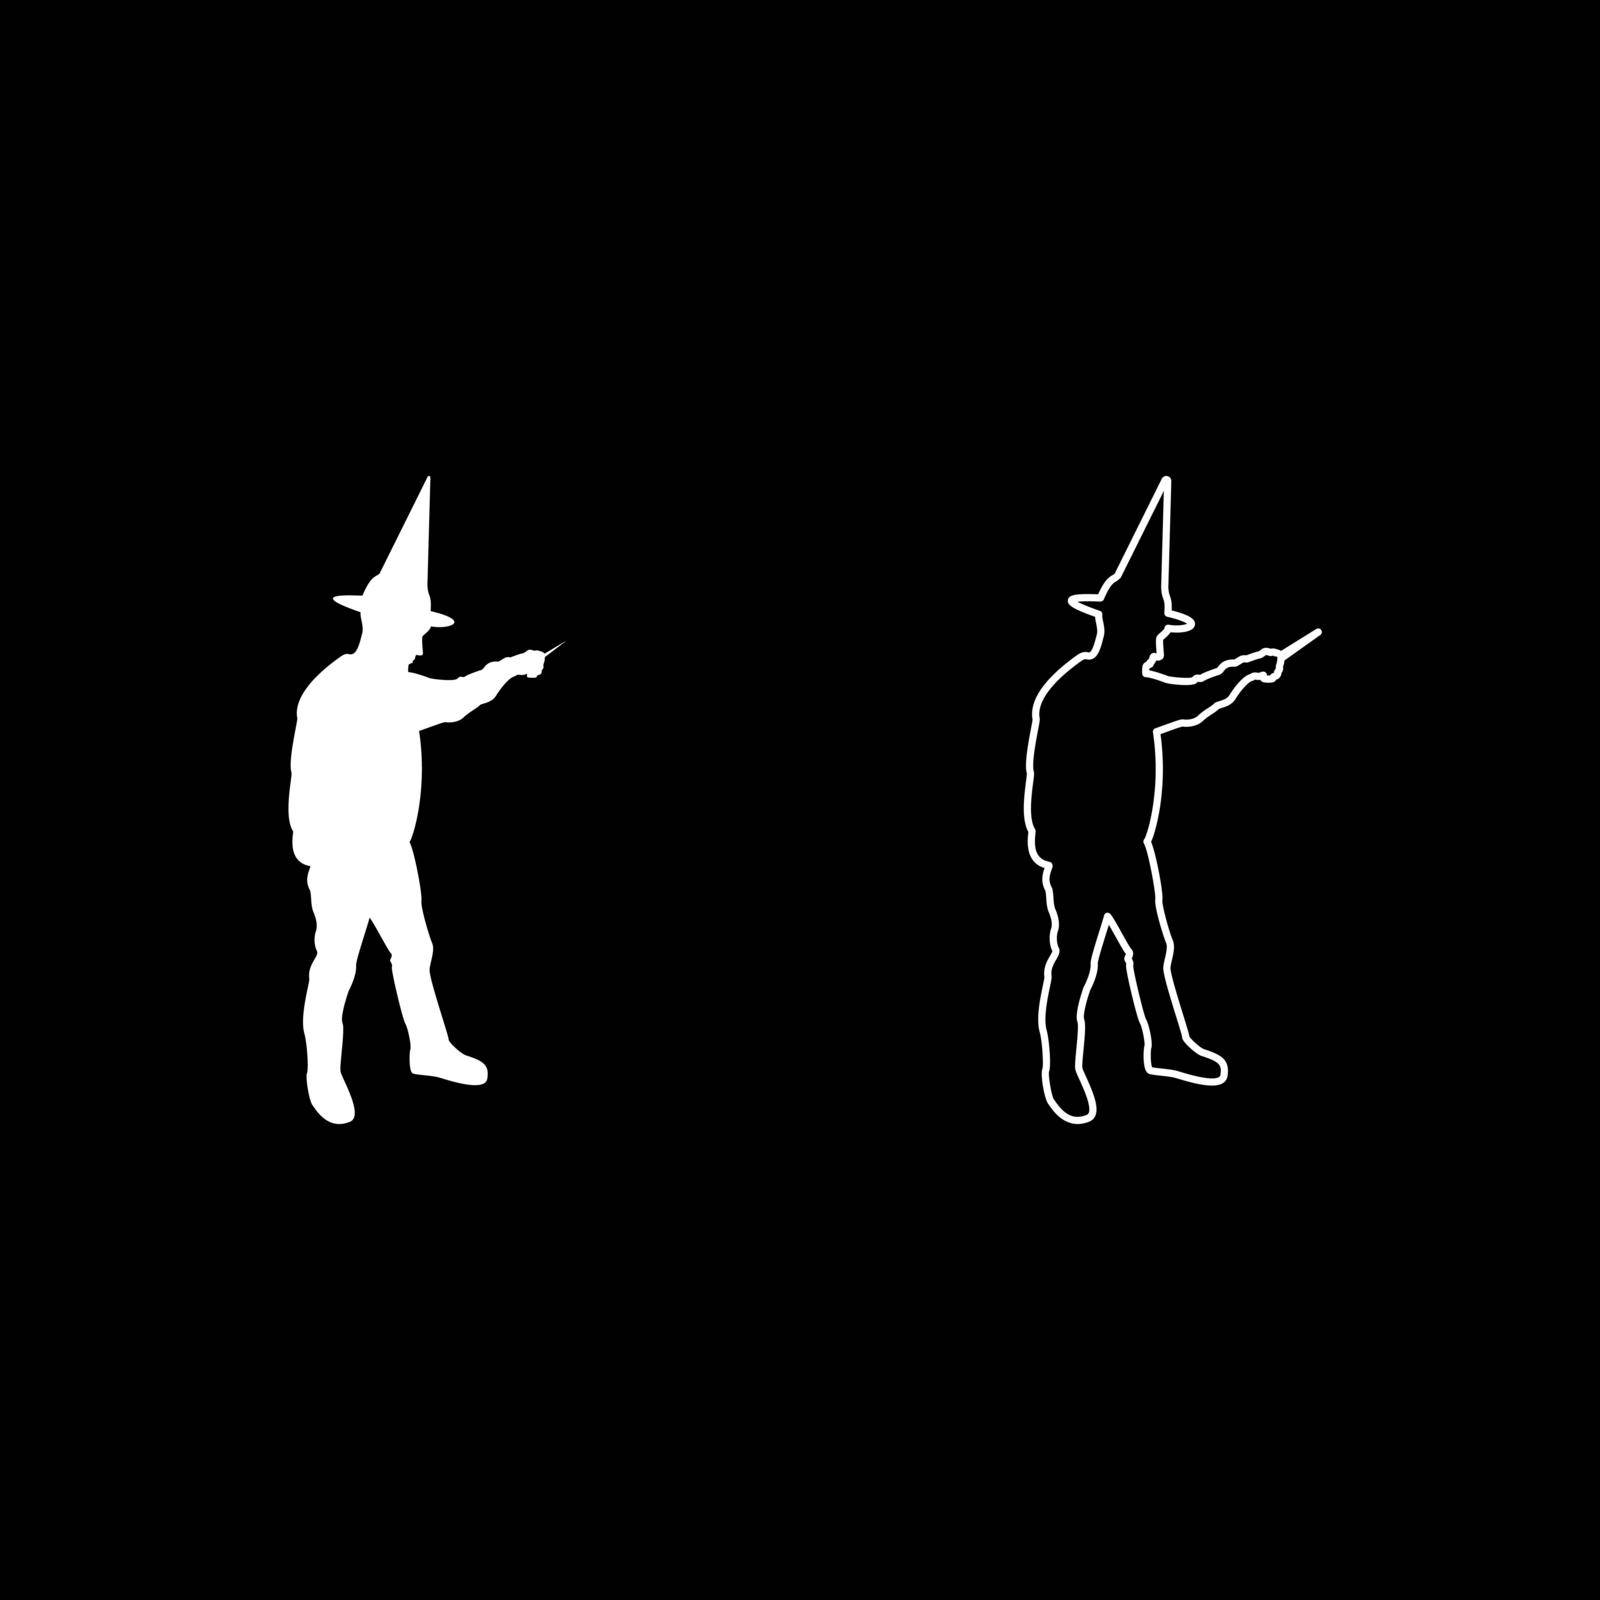 Wizard holds magic wand trick Waving Sorcery concept Magician Sorcerer Fantasy person Warlock man in robe with magical stick Witchcraft in hat mantle Mage conjure Mystery idea Enchantment silhouette white color vector illustration solid outline style simple image